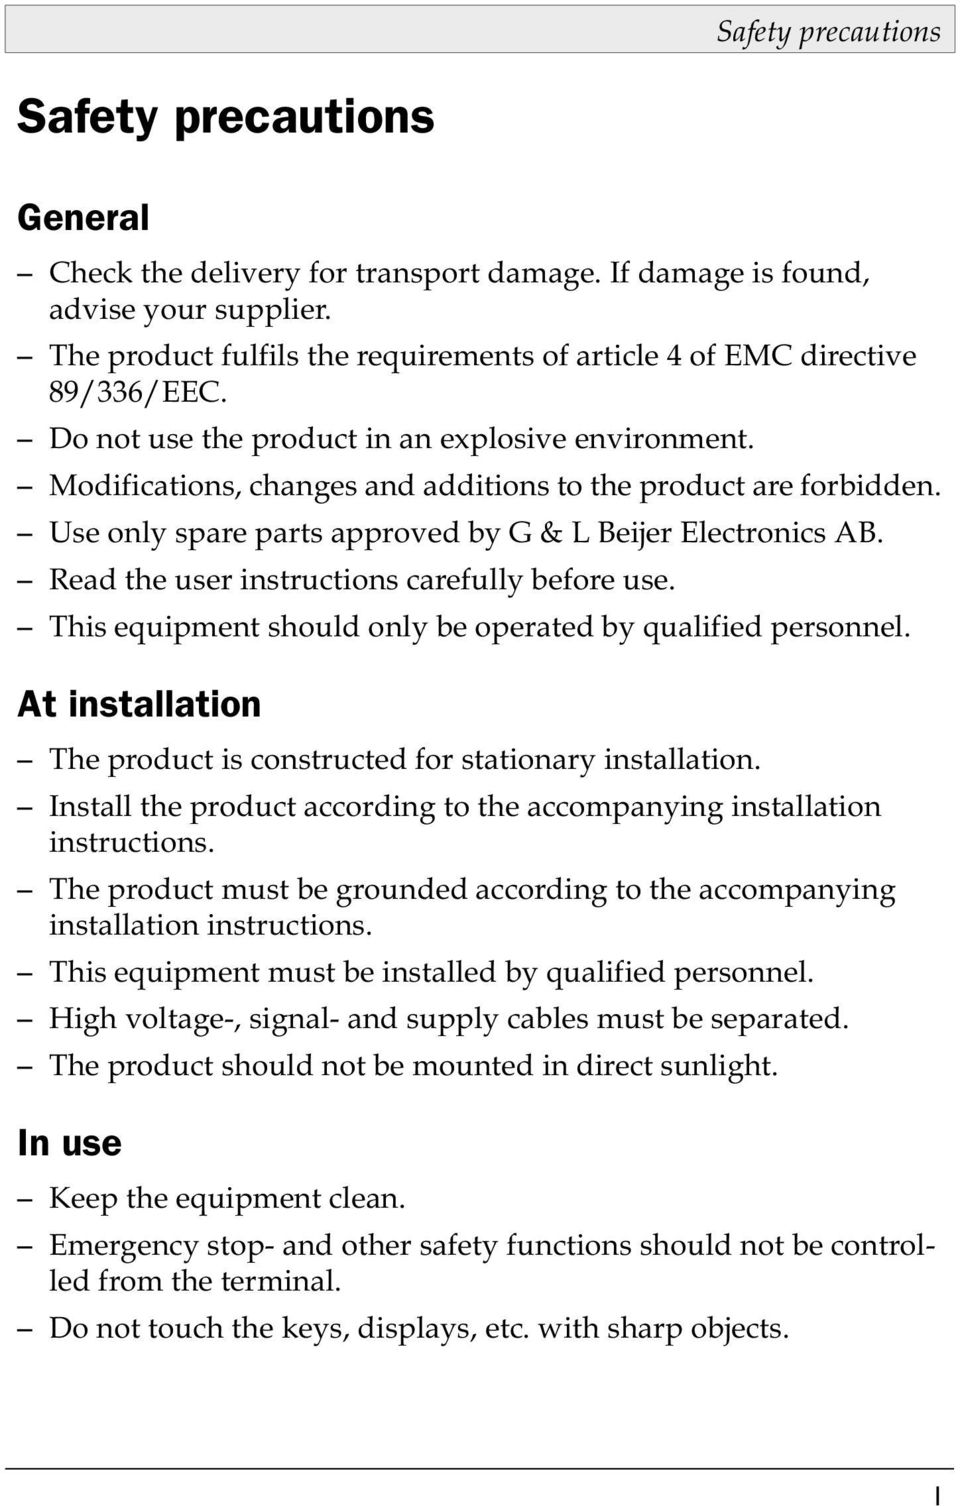 Use only spare parts approved by G & L Beijer Electronics AB. Read the user instructions carefully before use. This equipment should only be operated by qualified personnel.